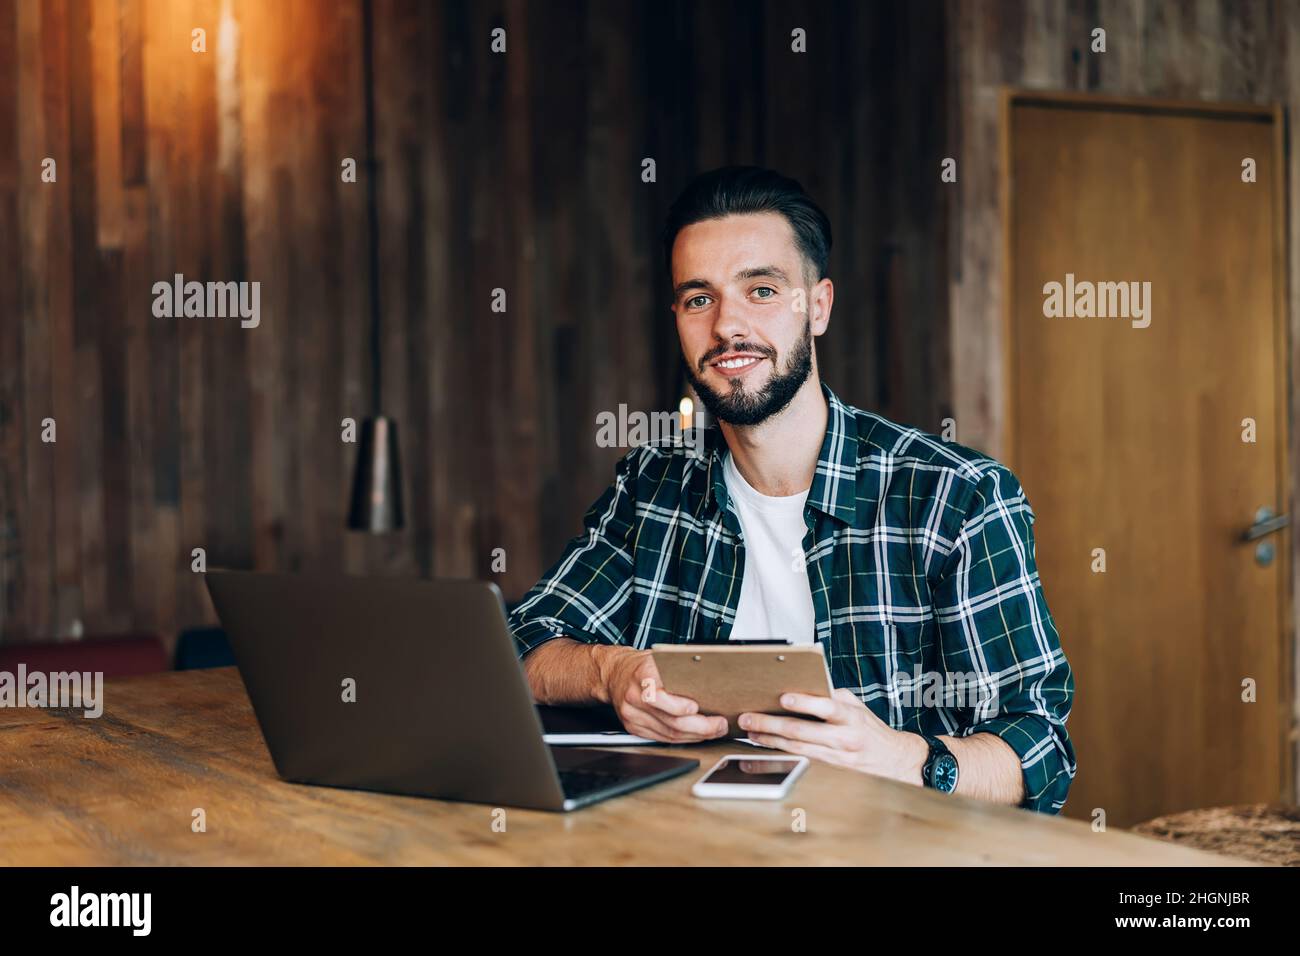 happy hipster guy working remotely in cafe interior sitting at desk with tech netbook Stock Photo